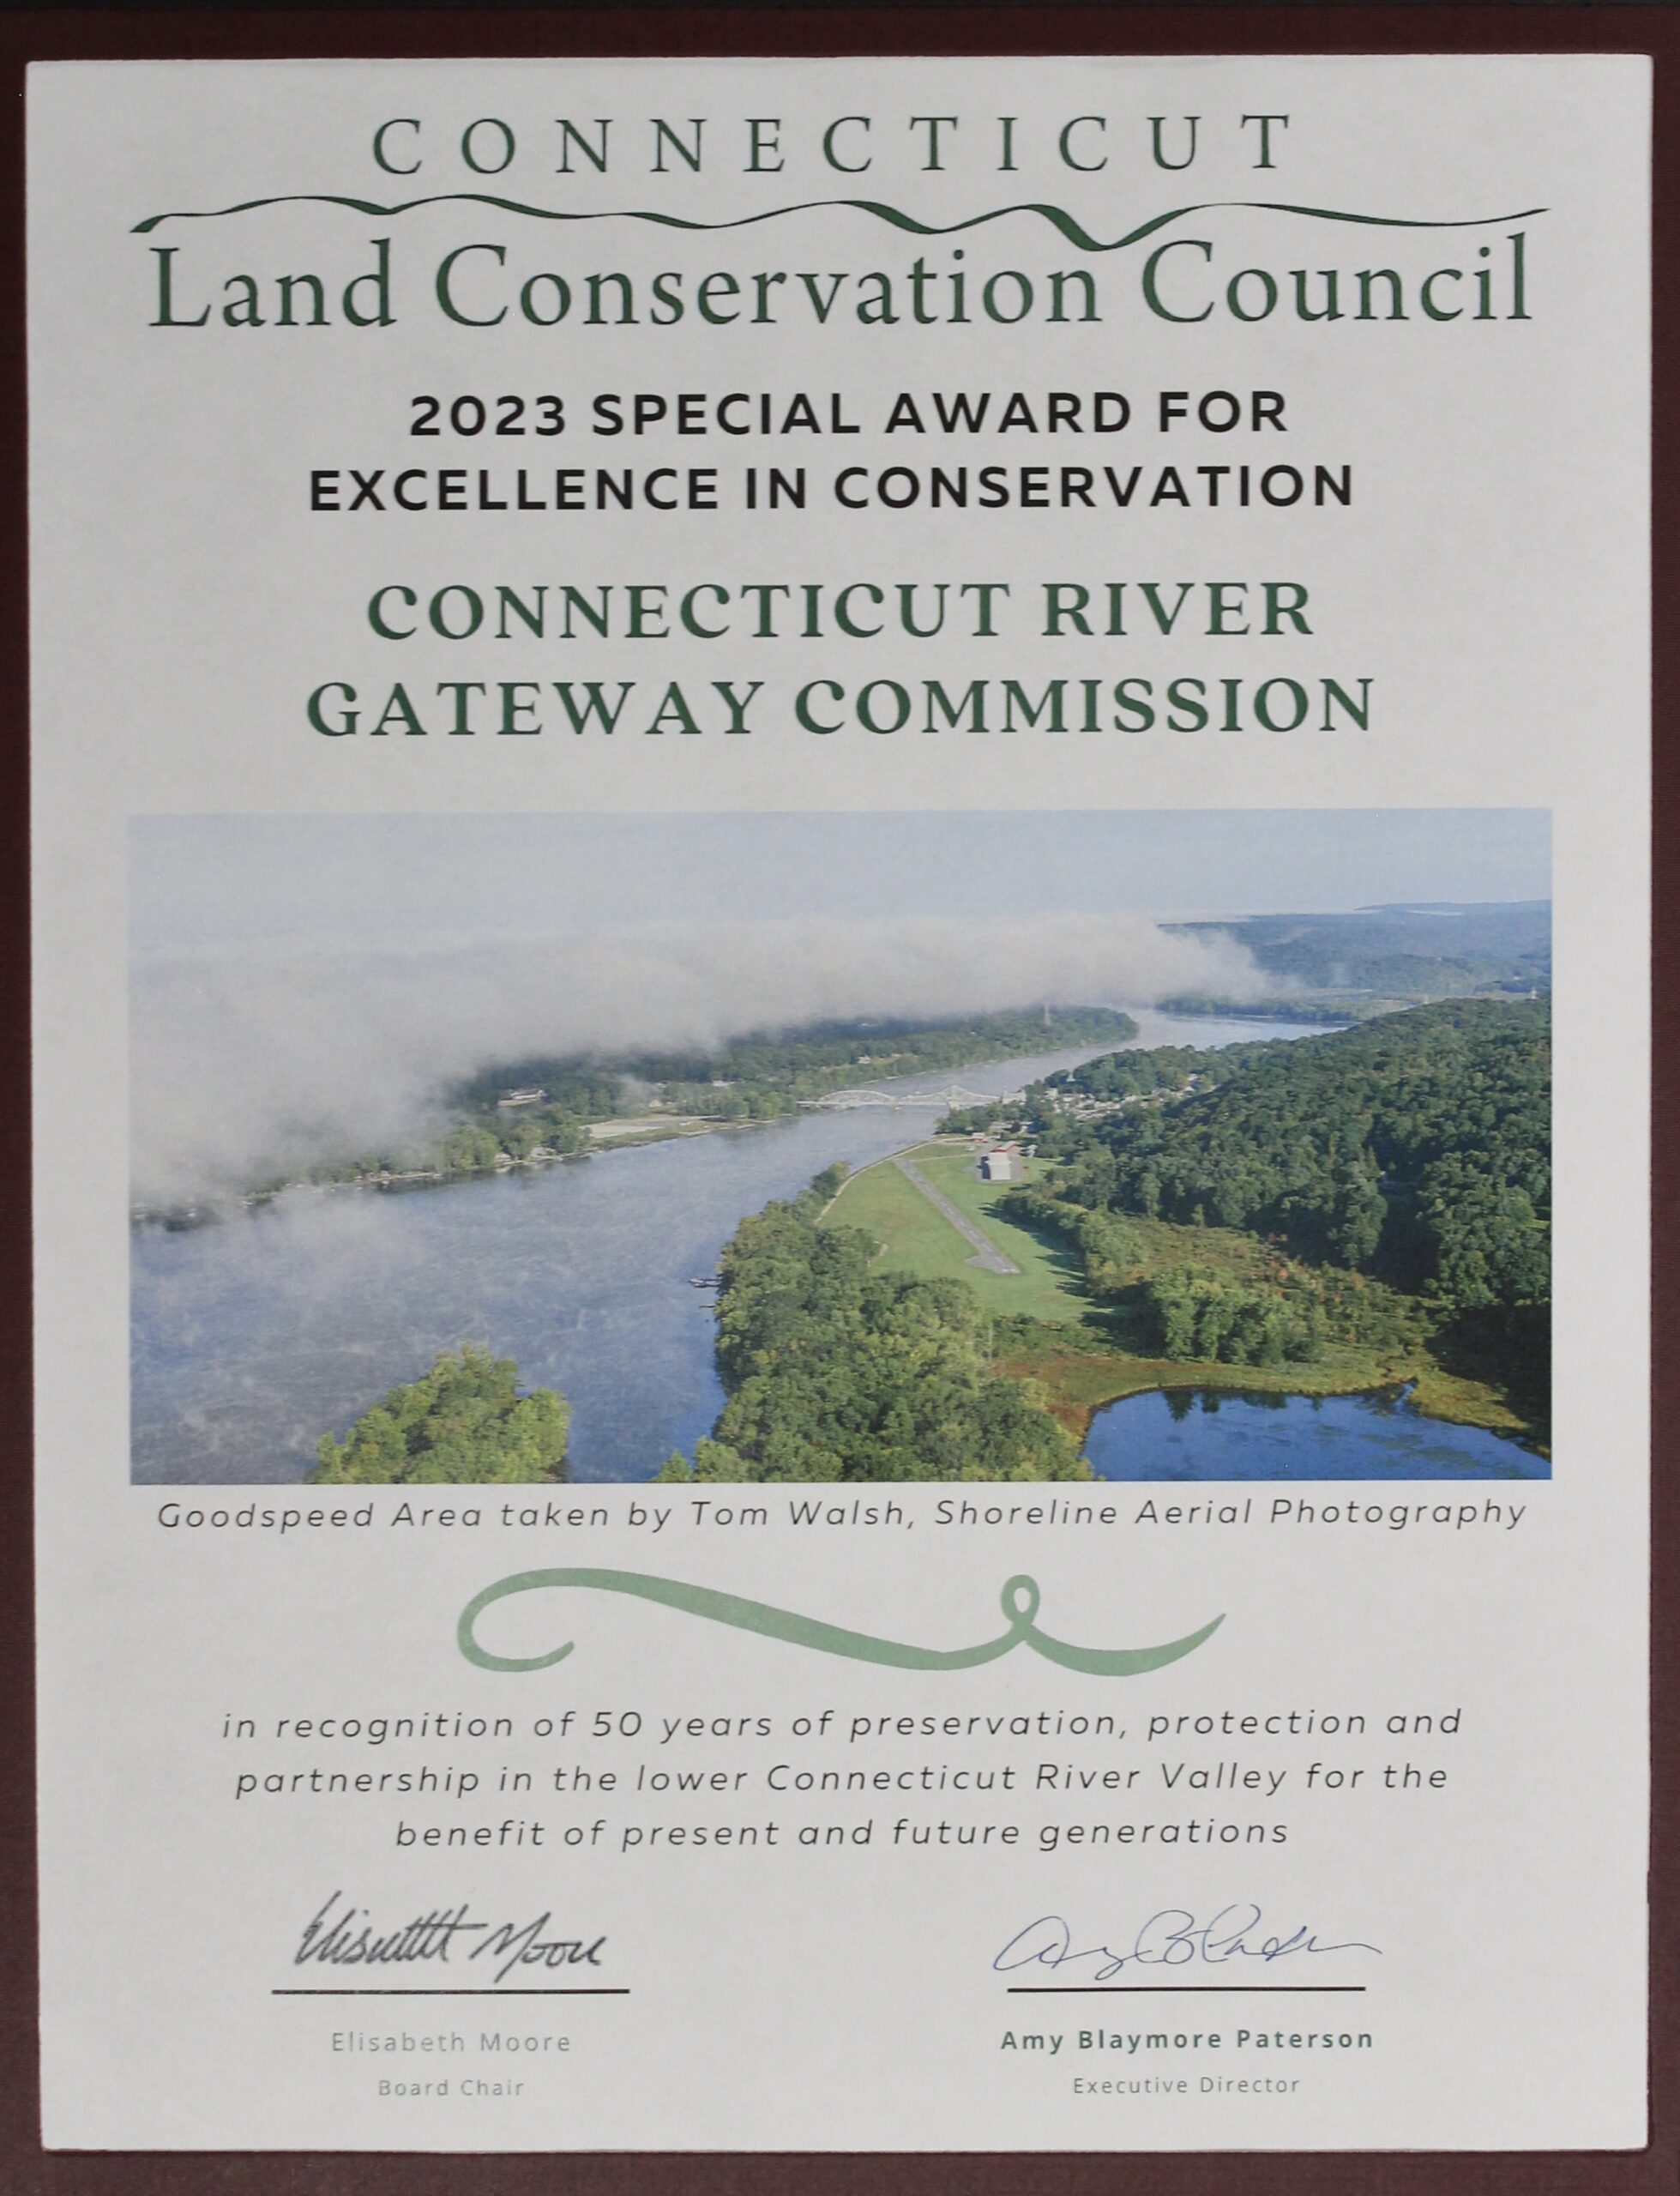 2023 Special Award for Excellence in Conservation from the CT Land Conservation Council to the Connecticut River Gateway Commission